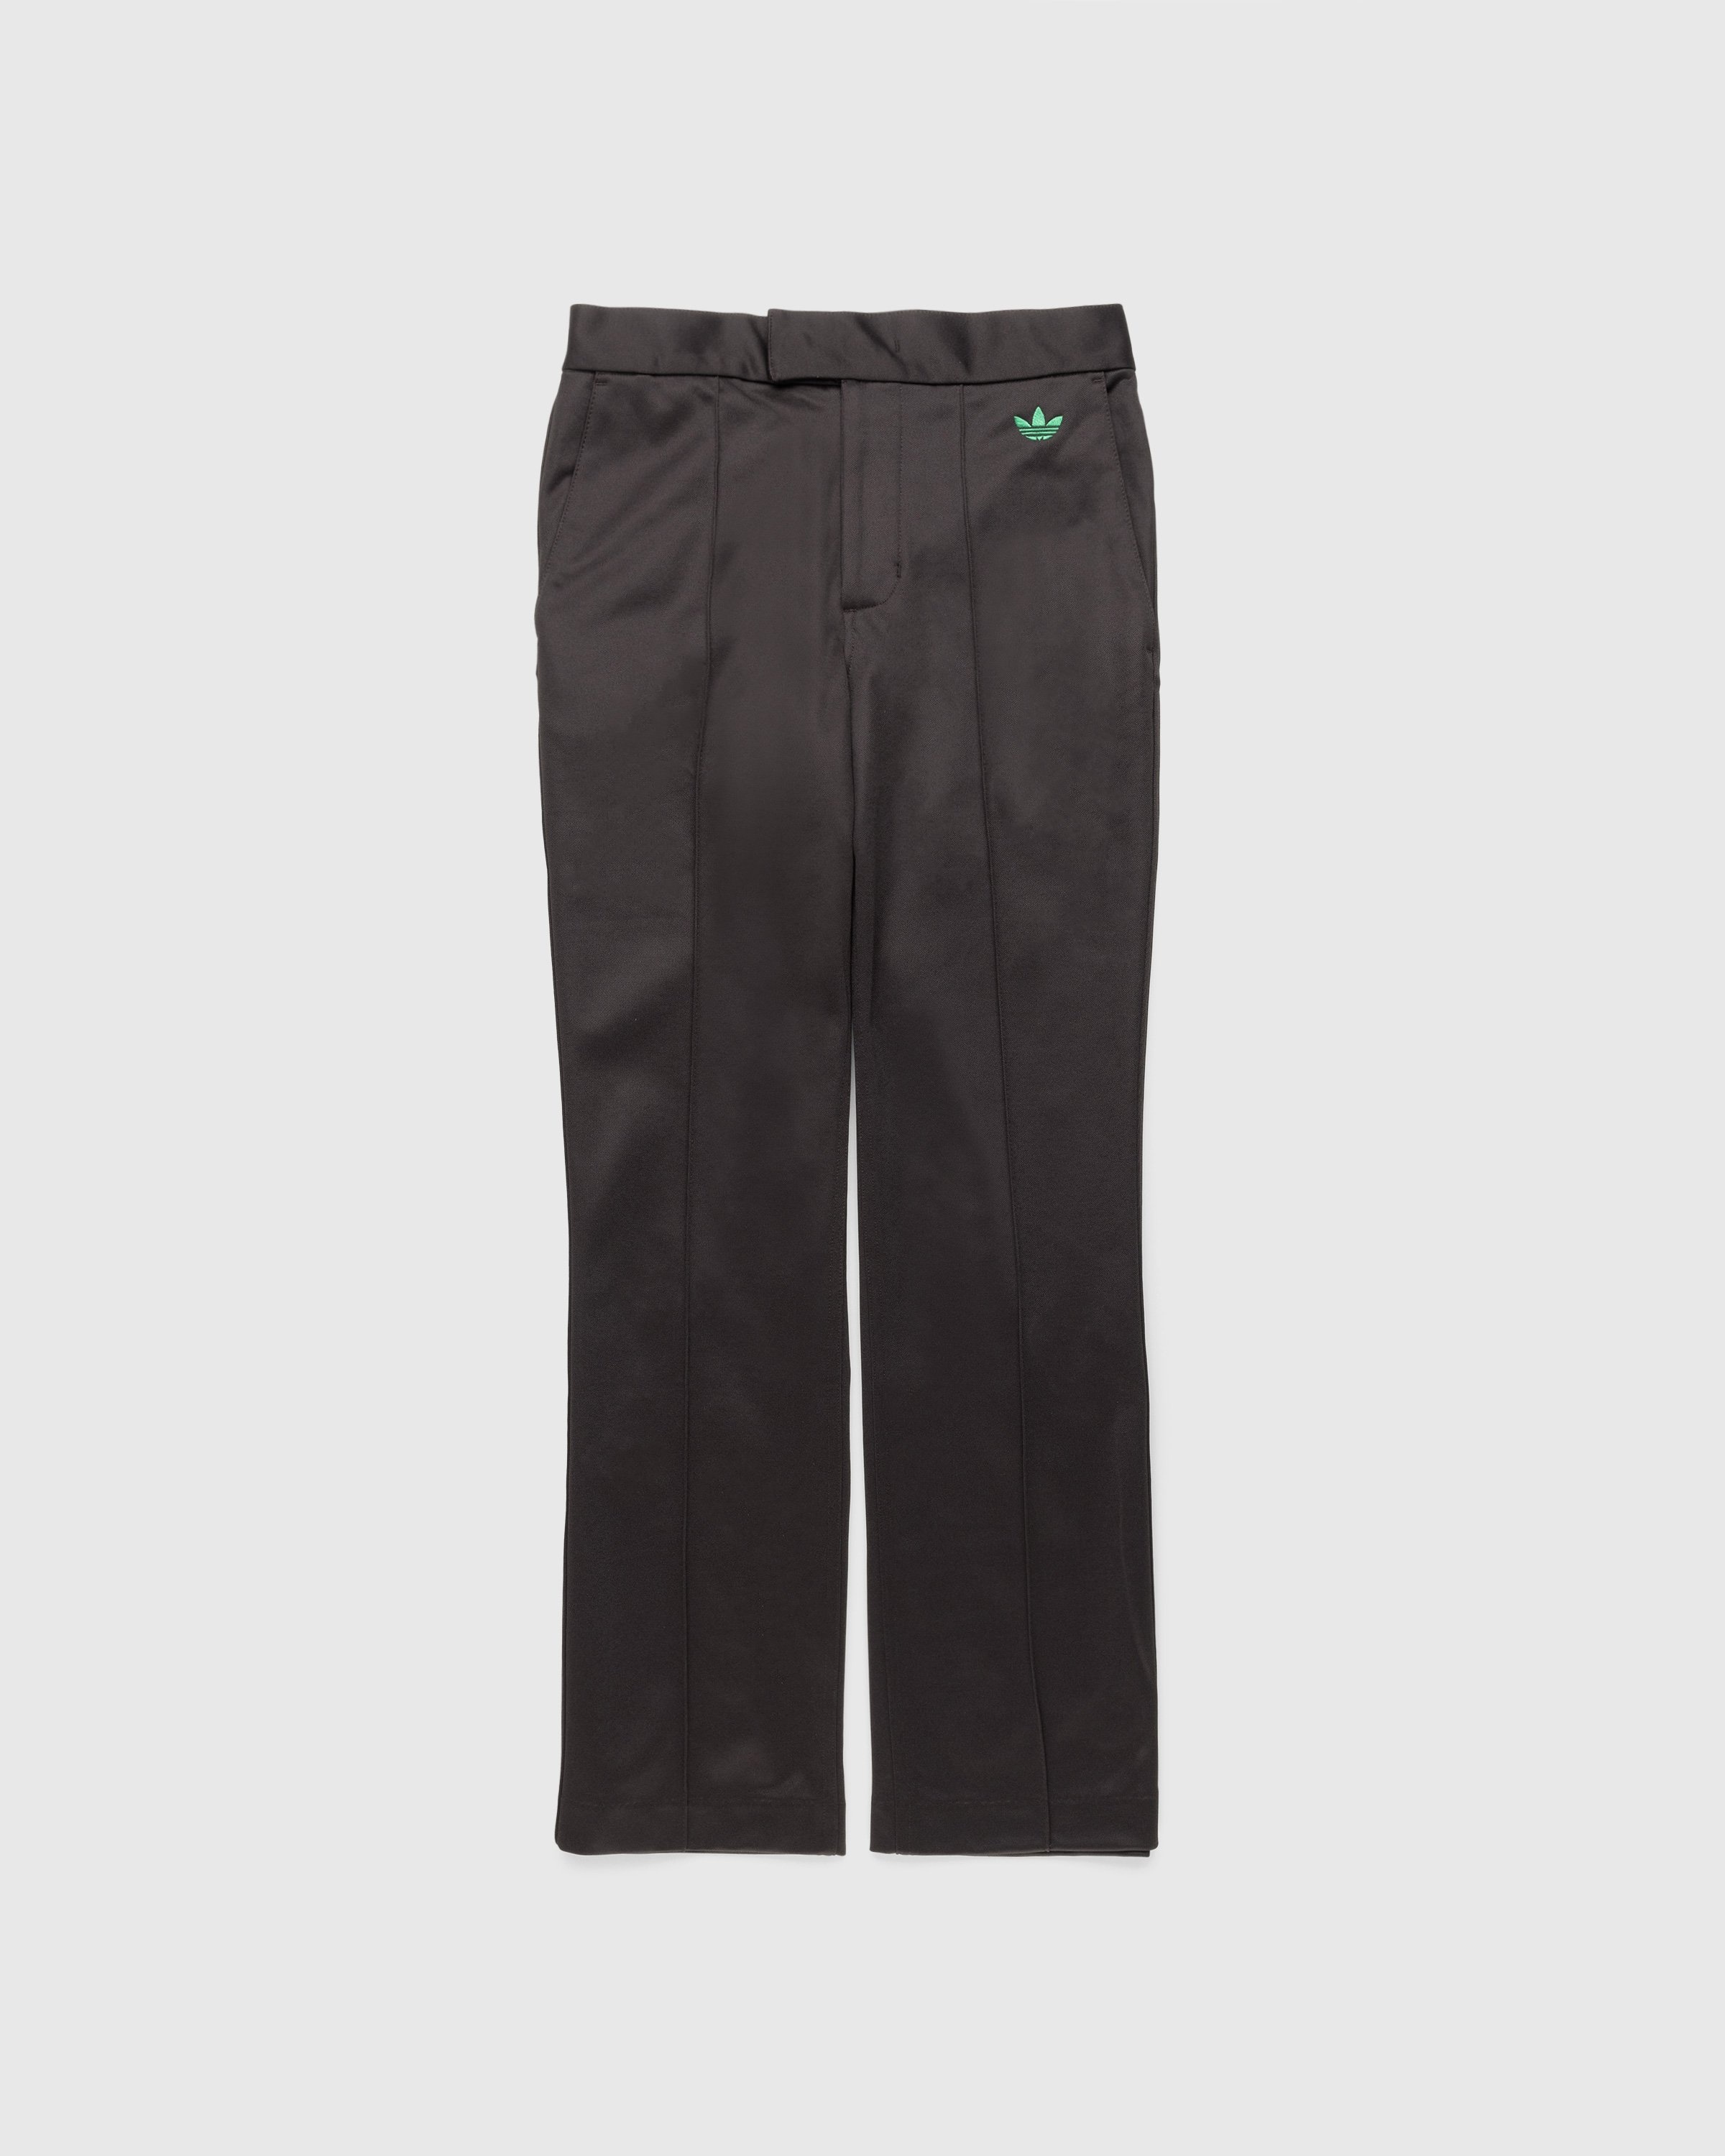 Adidas x Wales Bonner – Flared Trousers Night Brown - Pants - Brown - Image 1